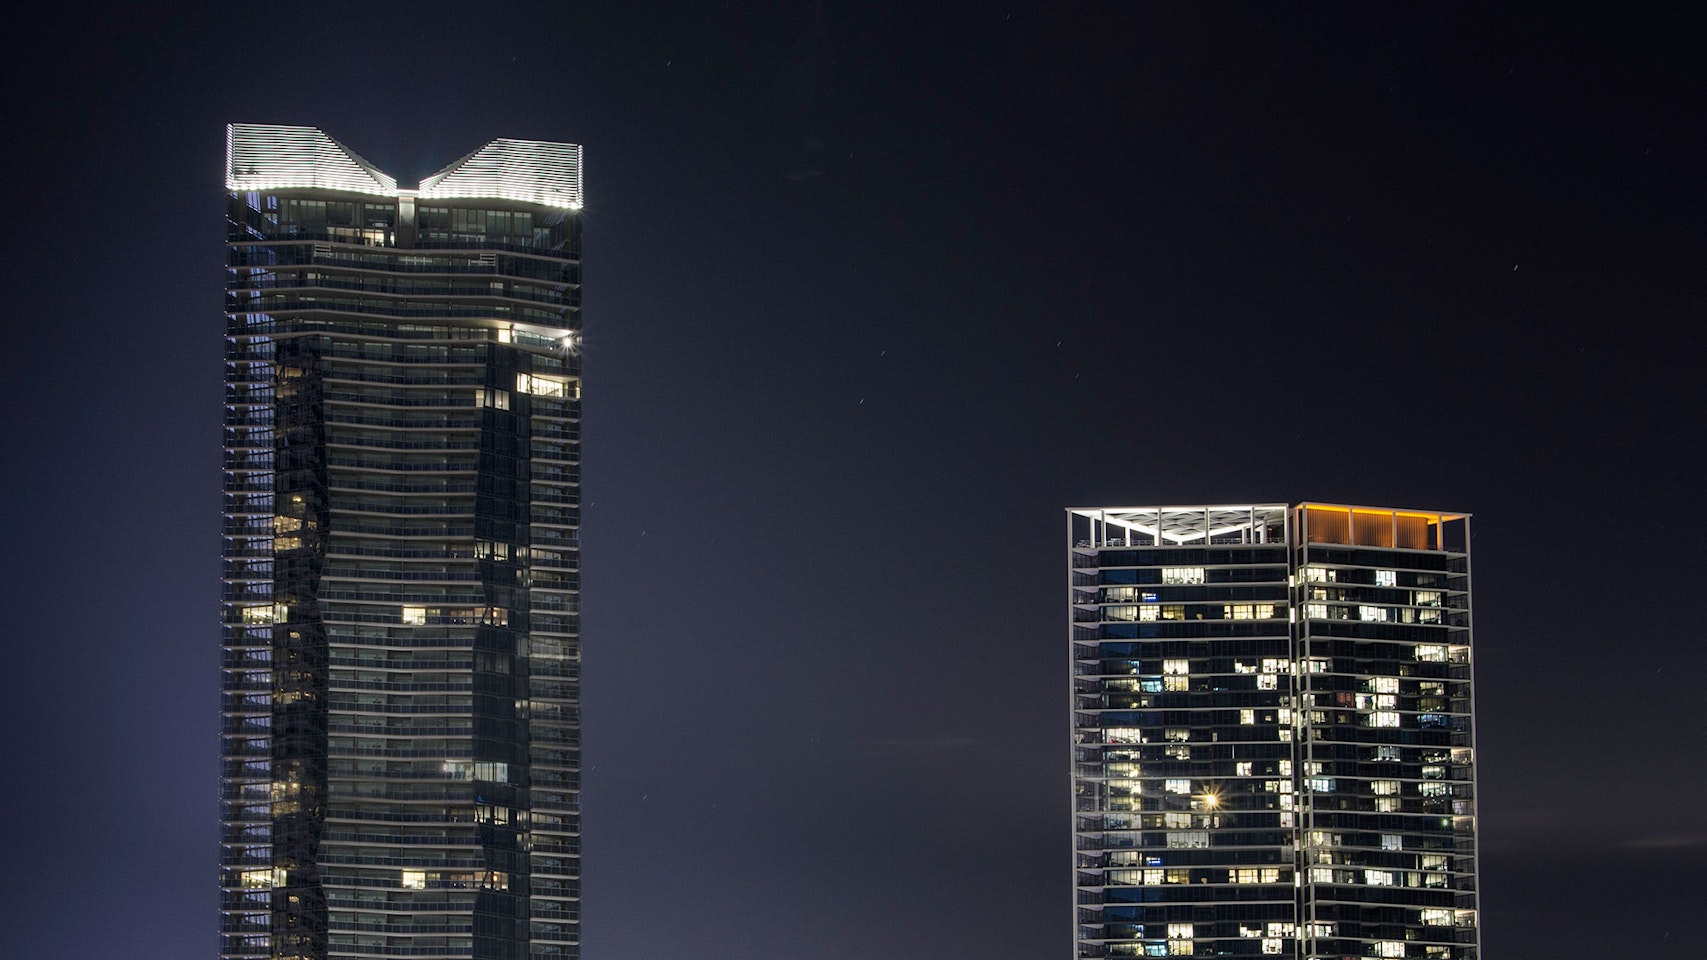 Maxis high-power linear flood light  in application, installed on Yarra Point (Tower 6). Maxis high-powered projector luminaires, complete with flare optics, are used to illuminate the architectural crown of the building.